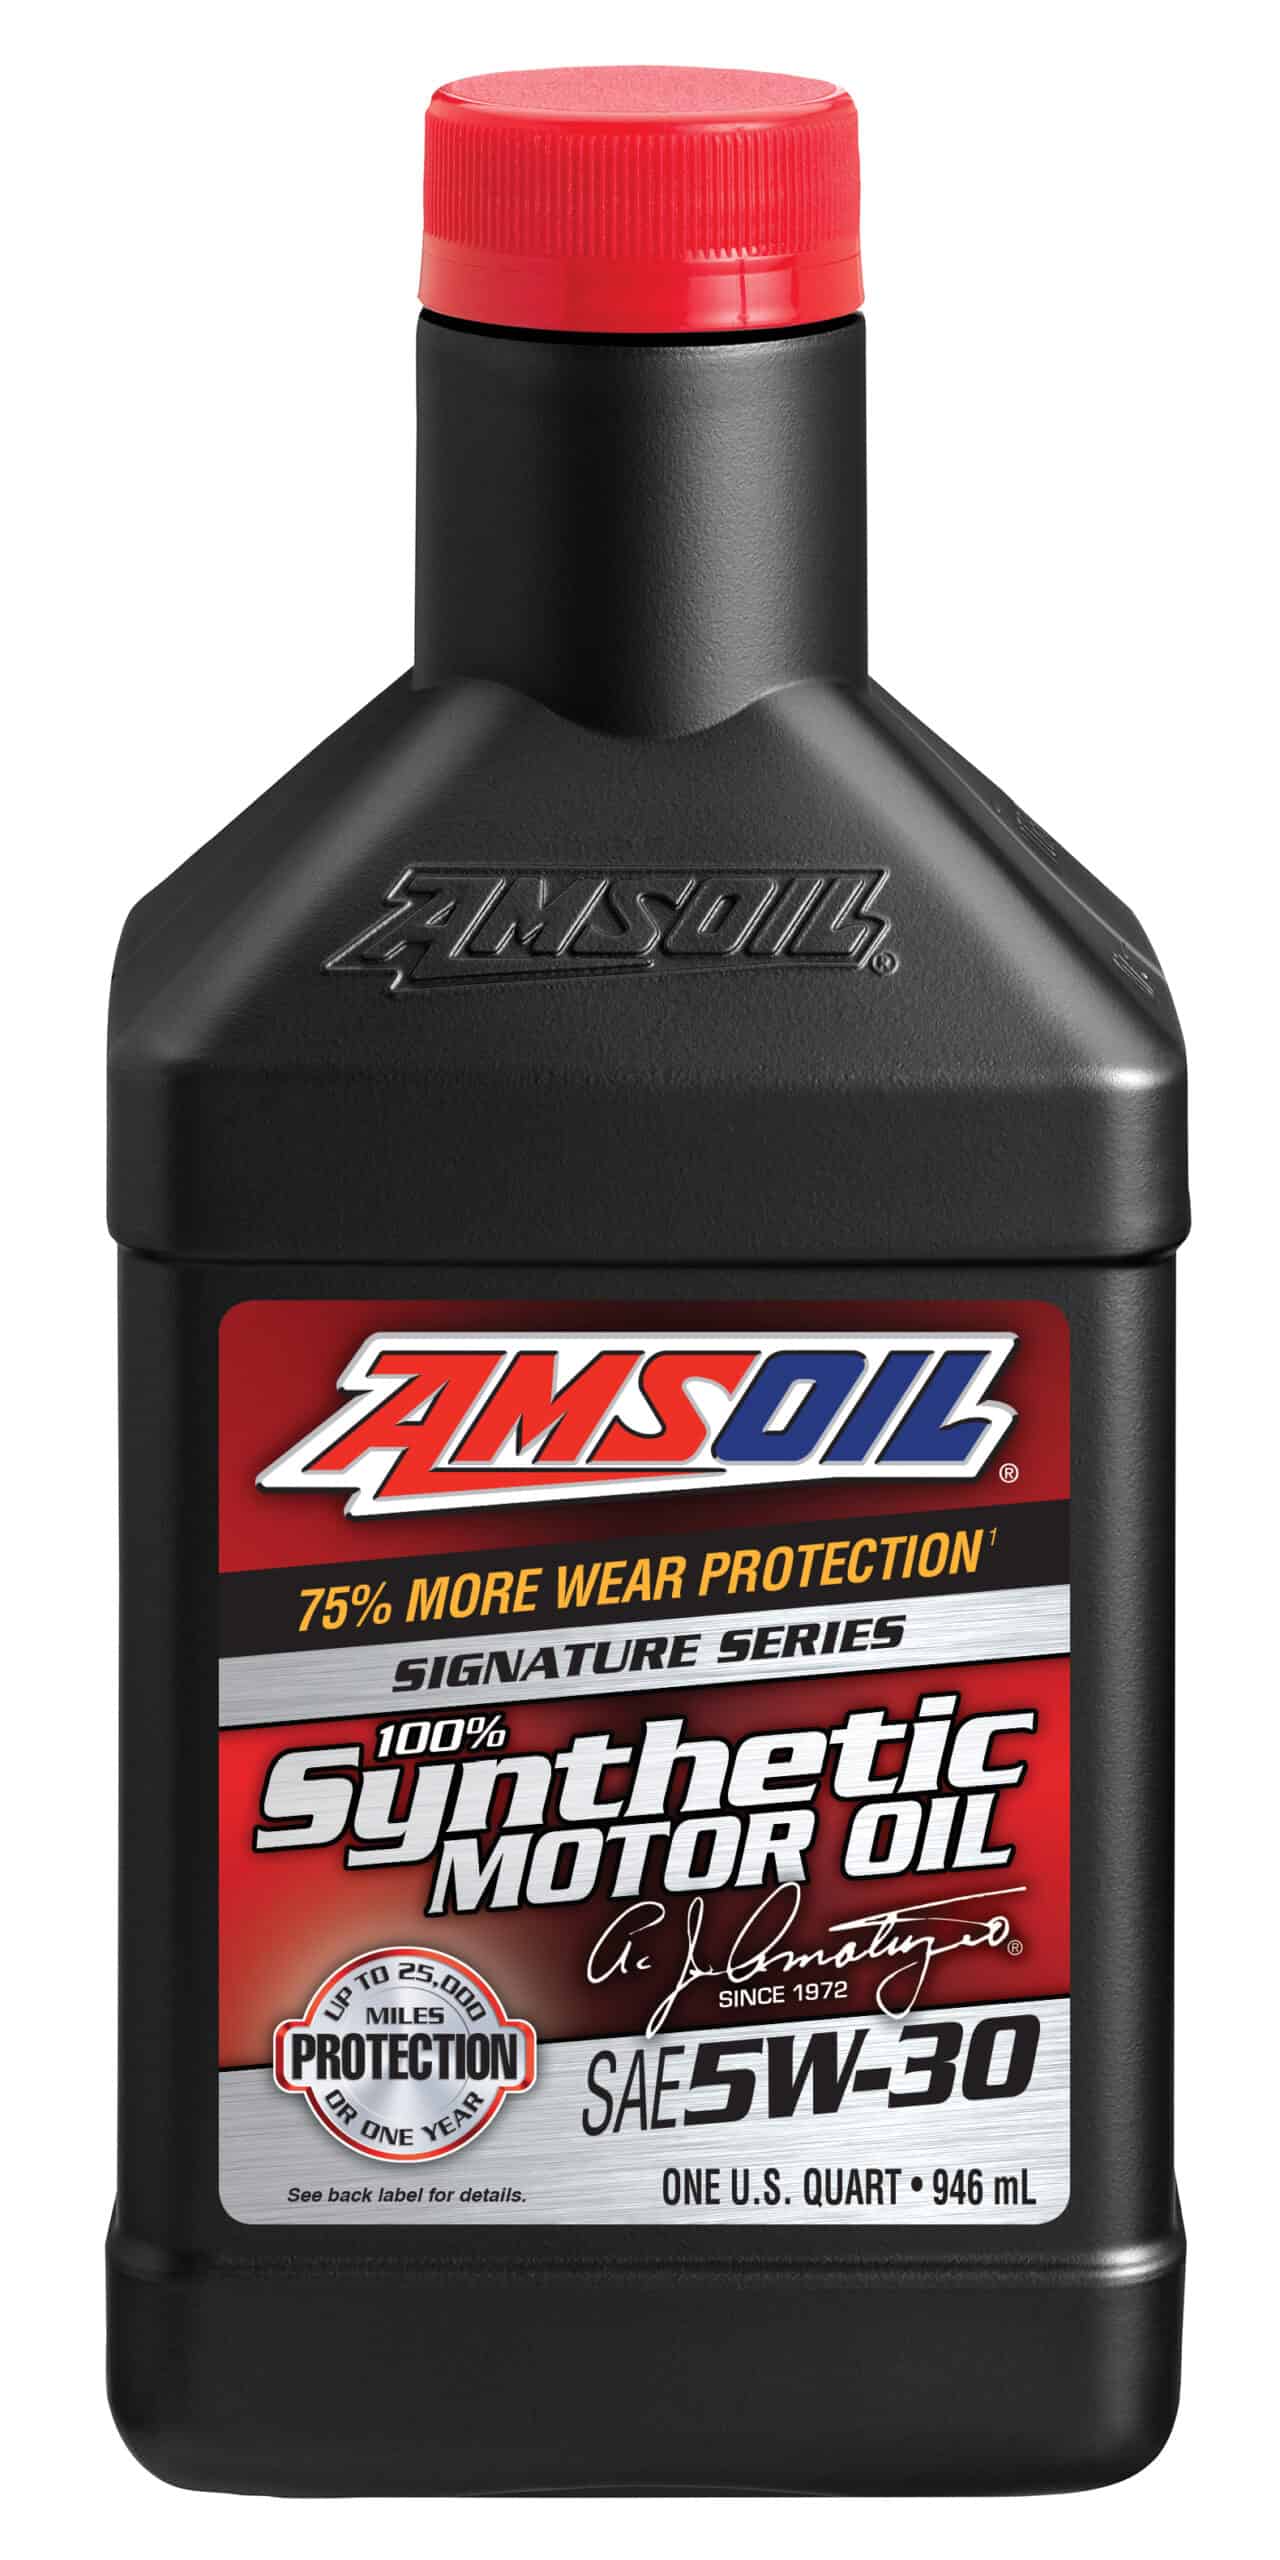 A bottle of AMSOIL 100% Synthetic Motor Oil. It is not only the best oil we have ever made, it’s also better than any competitive oil we have tested.